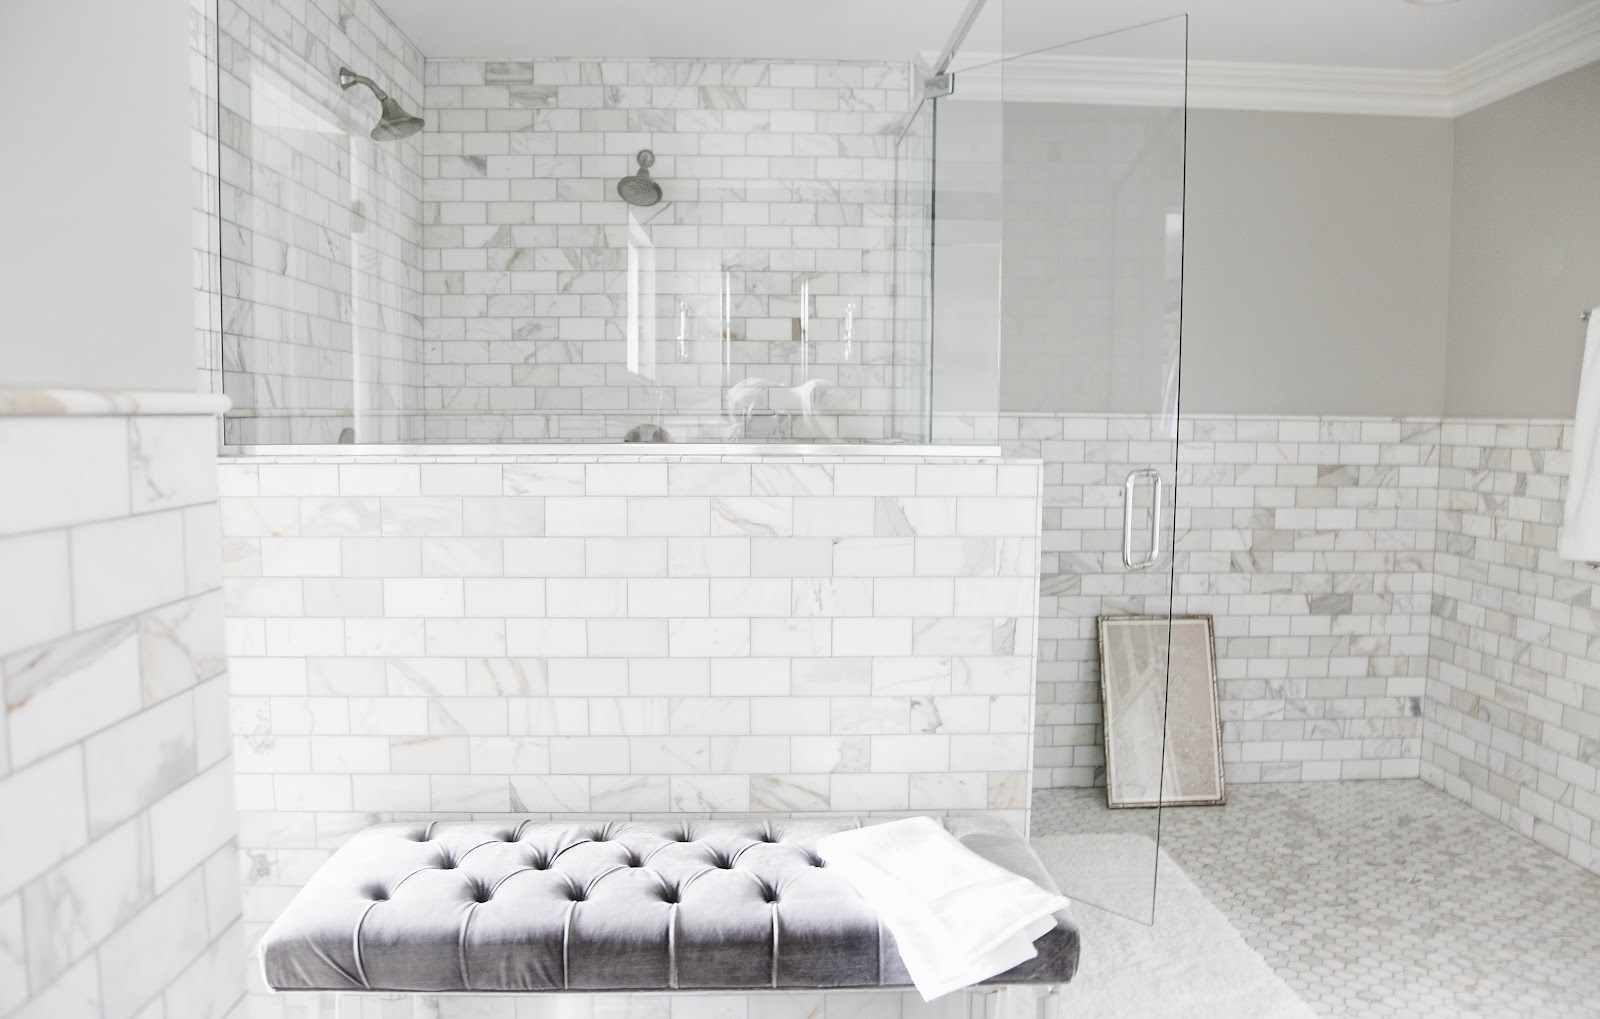 modern-style-white-marble-subway-tile-bathroom-with-interior-fabulous-glass-stall-bathroom-design-with-marble-subway-tiles-decor-and-classy-and-comfy-white-button-couch-collection-of-marble-bathroom-i